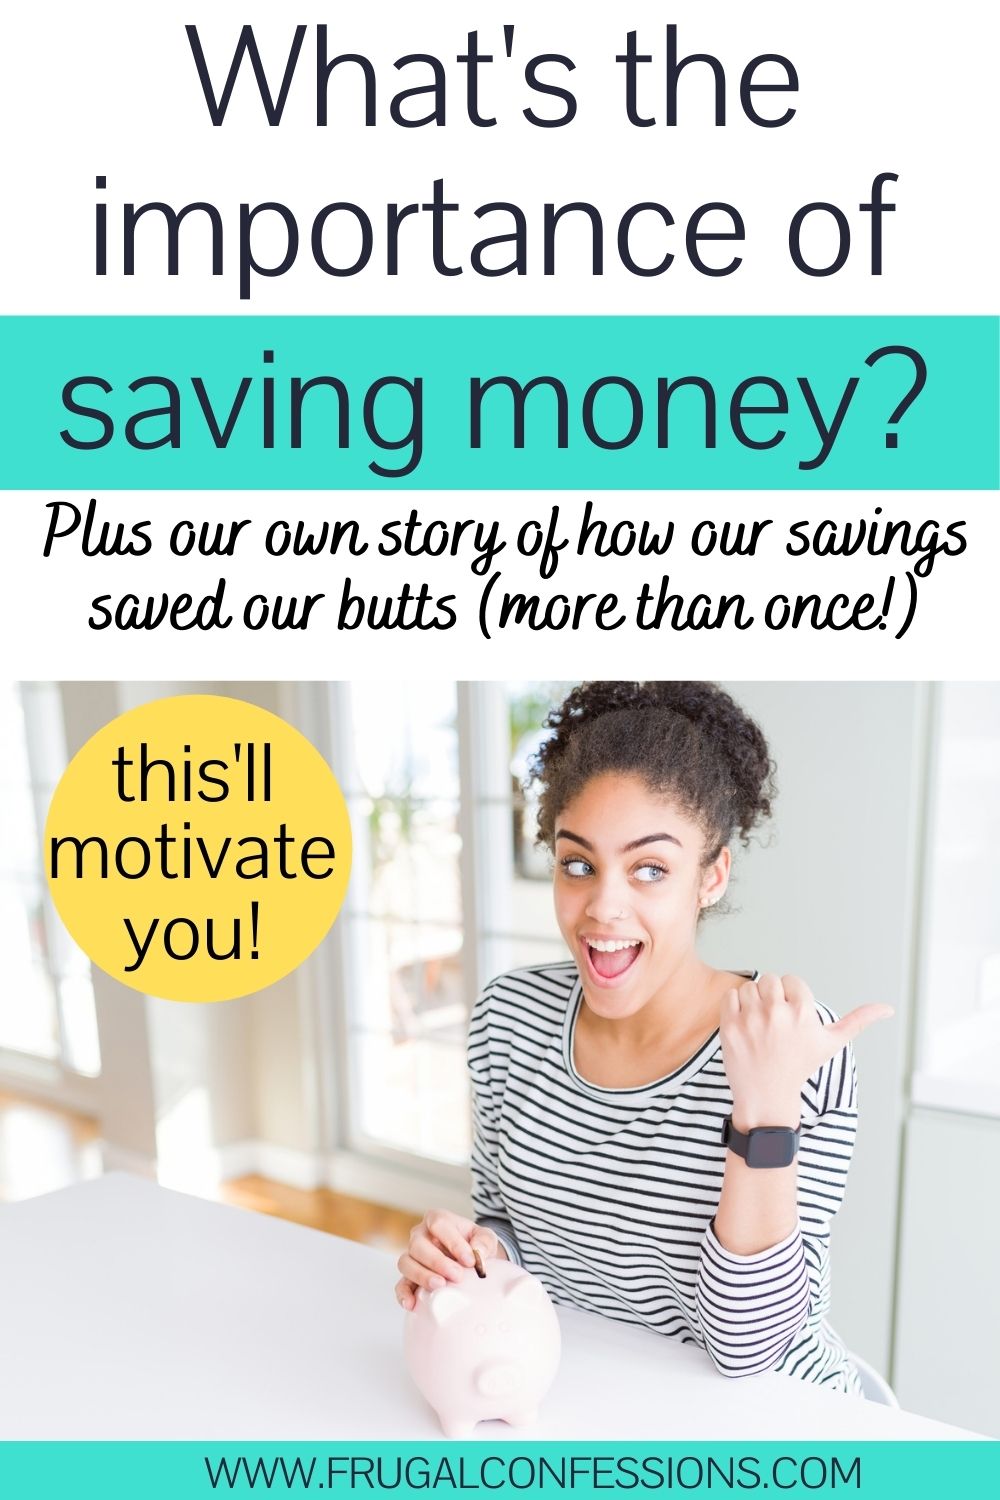 young woman smiling with piggy bank, text overlay "what's the importance of saving money?"